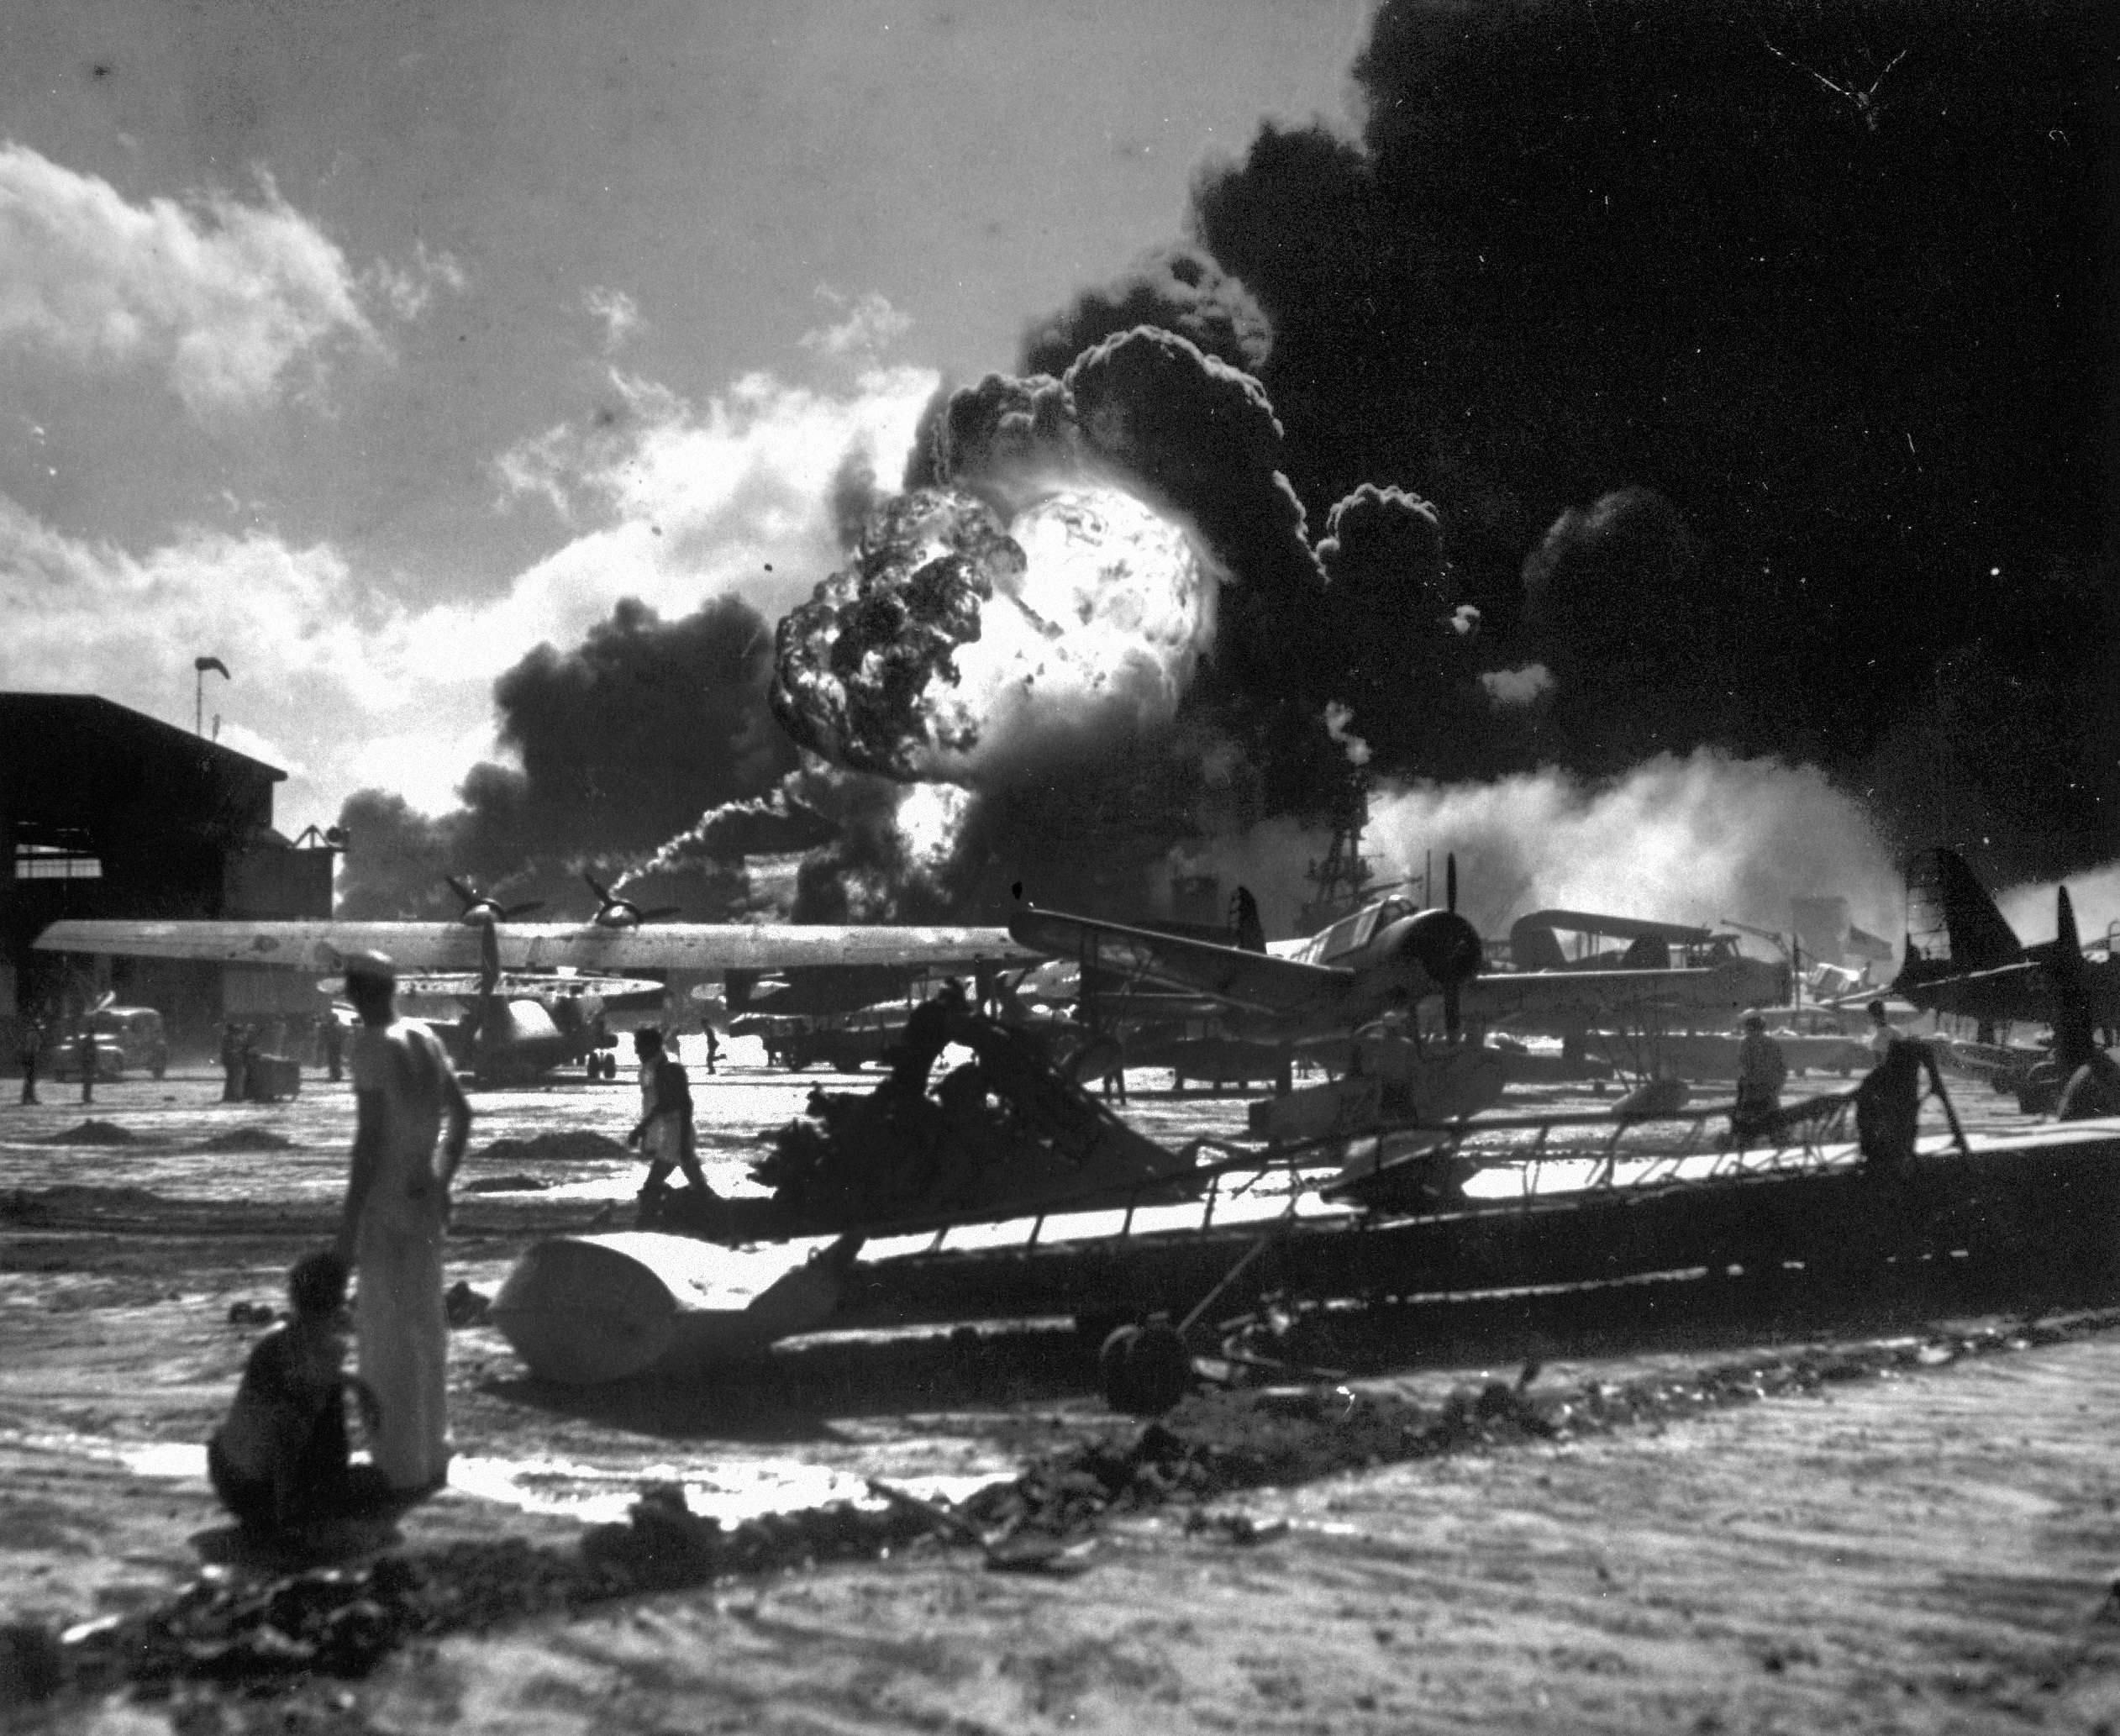 Sailors stand among wrecked airplanes at Ford Island Naval Air Station as they watch the explosion of the USS Shaw, background, during the Japanese surprise attack on Pearl Harbour, Hawaii. Photo: AP